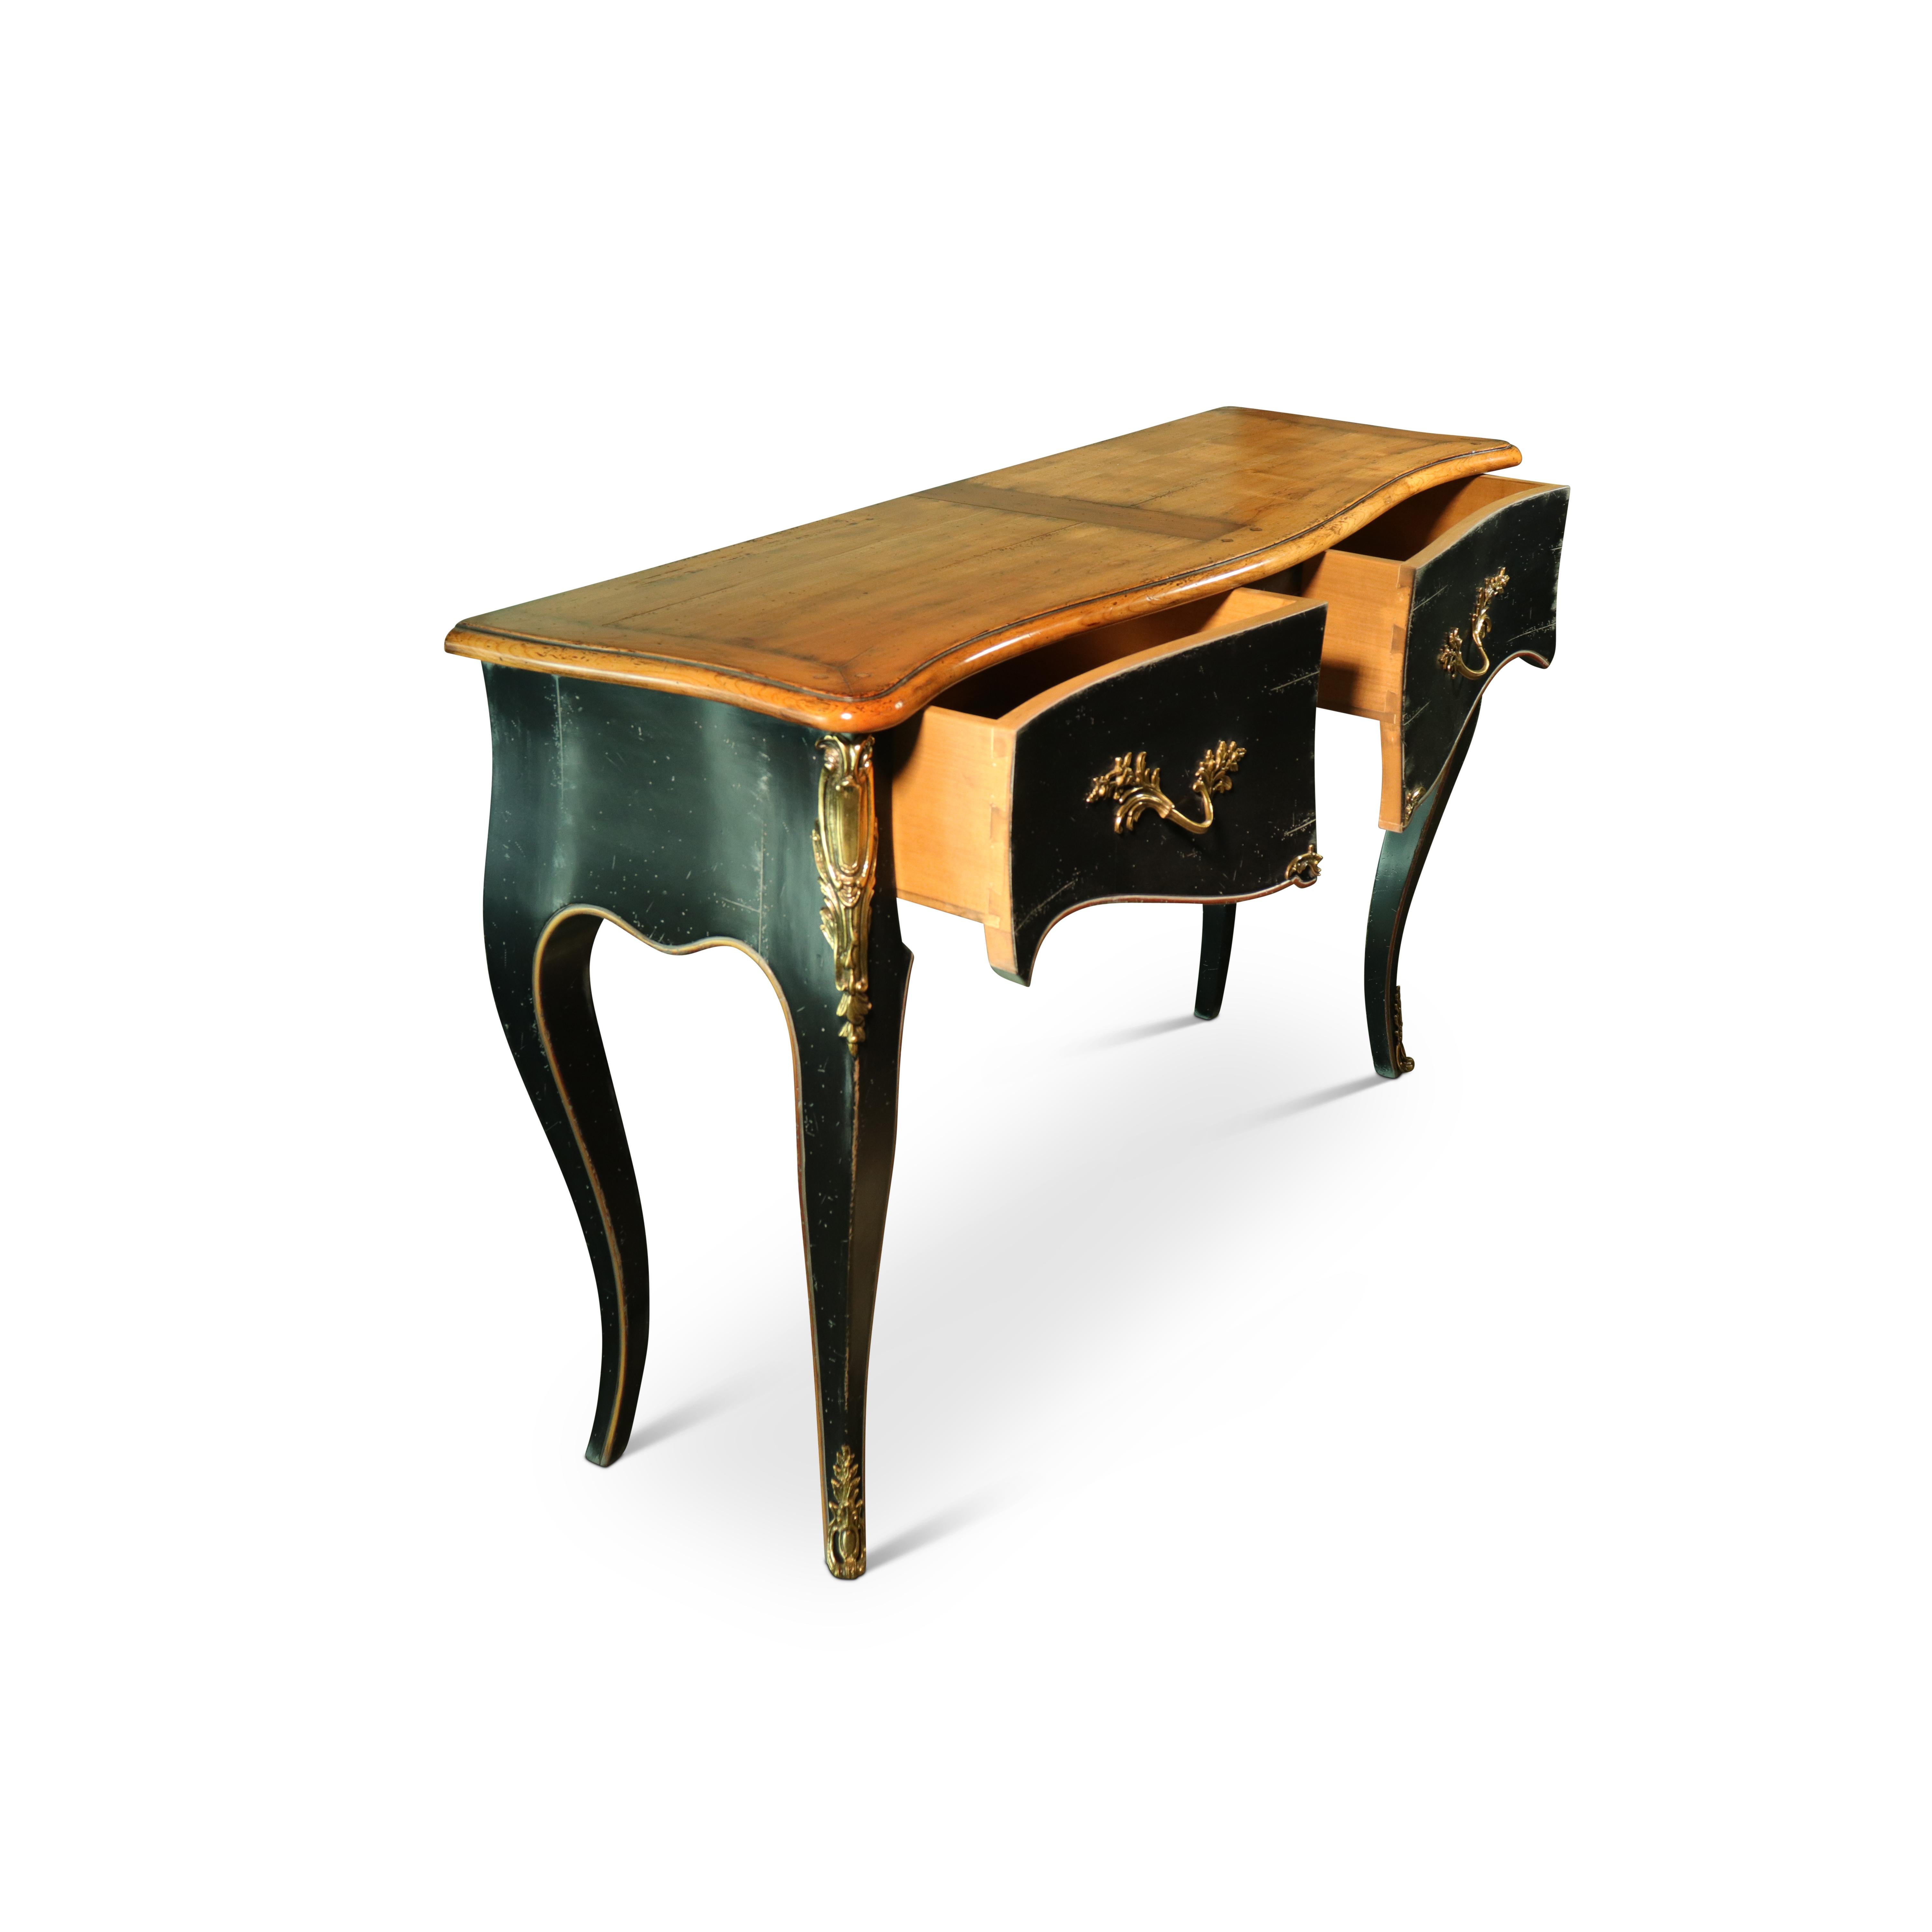 Hand-picked by us from Venezia, this extraordinary piece has been handcrafted by Venetian artisans based on a Luigi XV historical console. Featuring gilt brass and bronze drawer pulls and ormolu mounts, this superb console is a true homage to expert